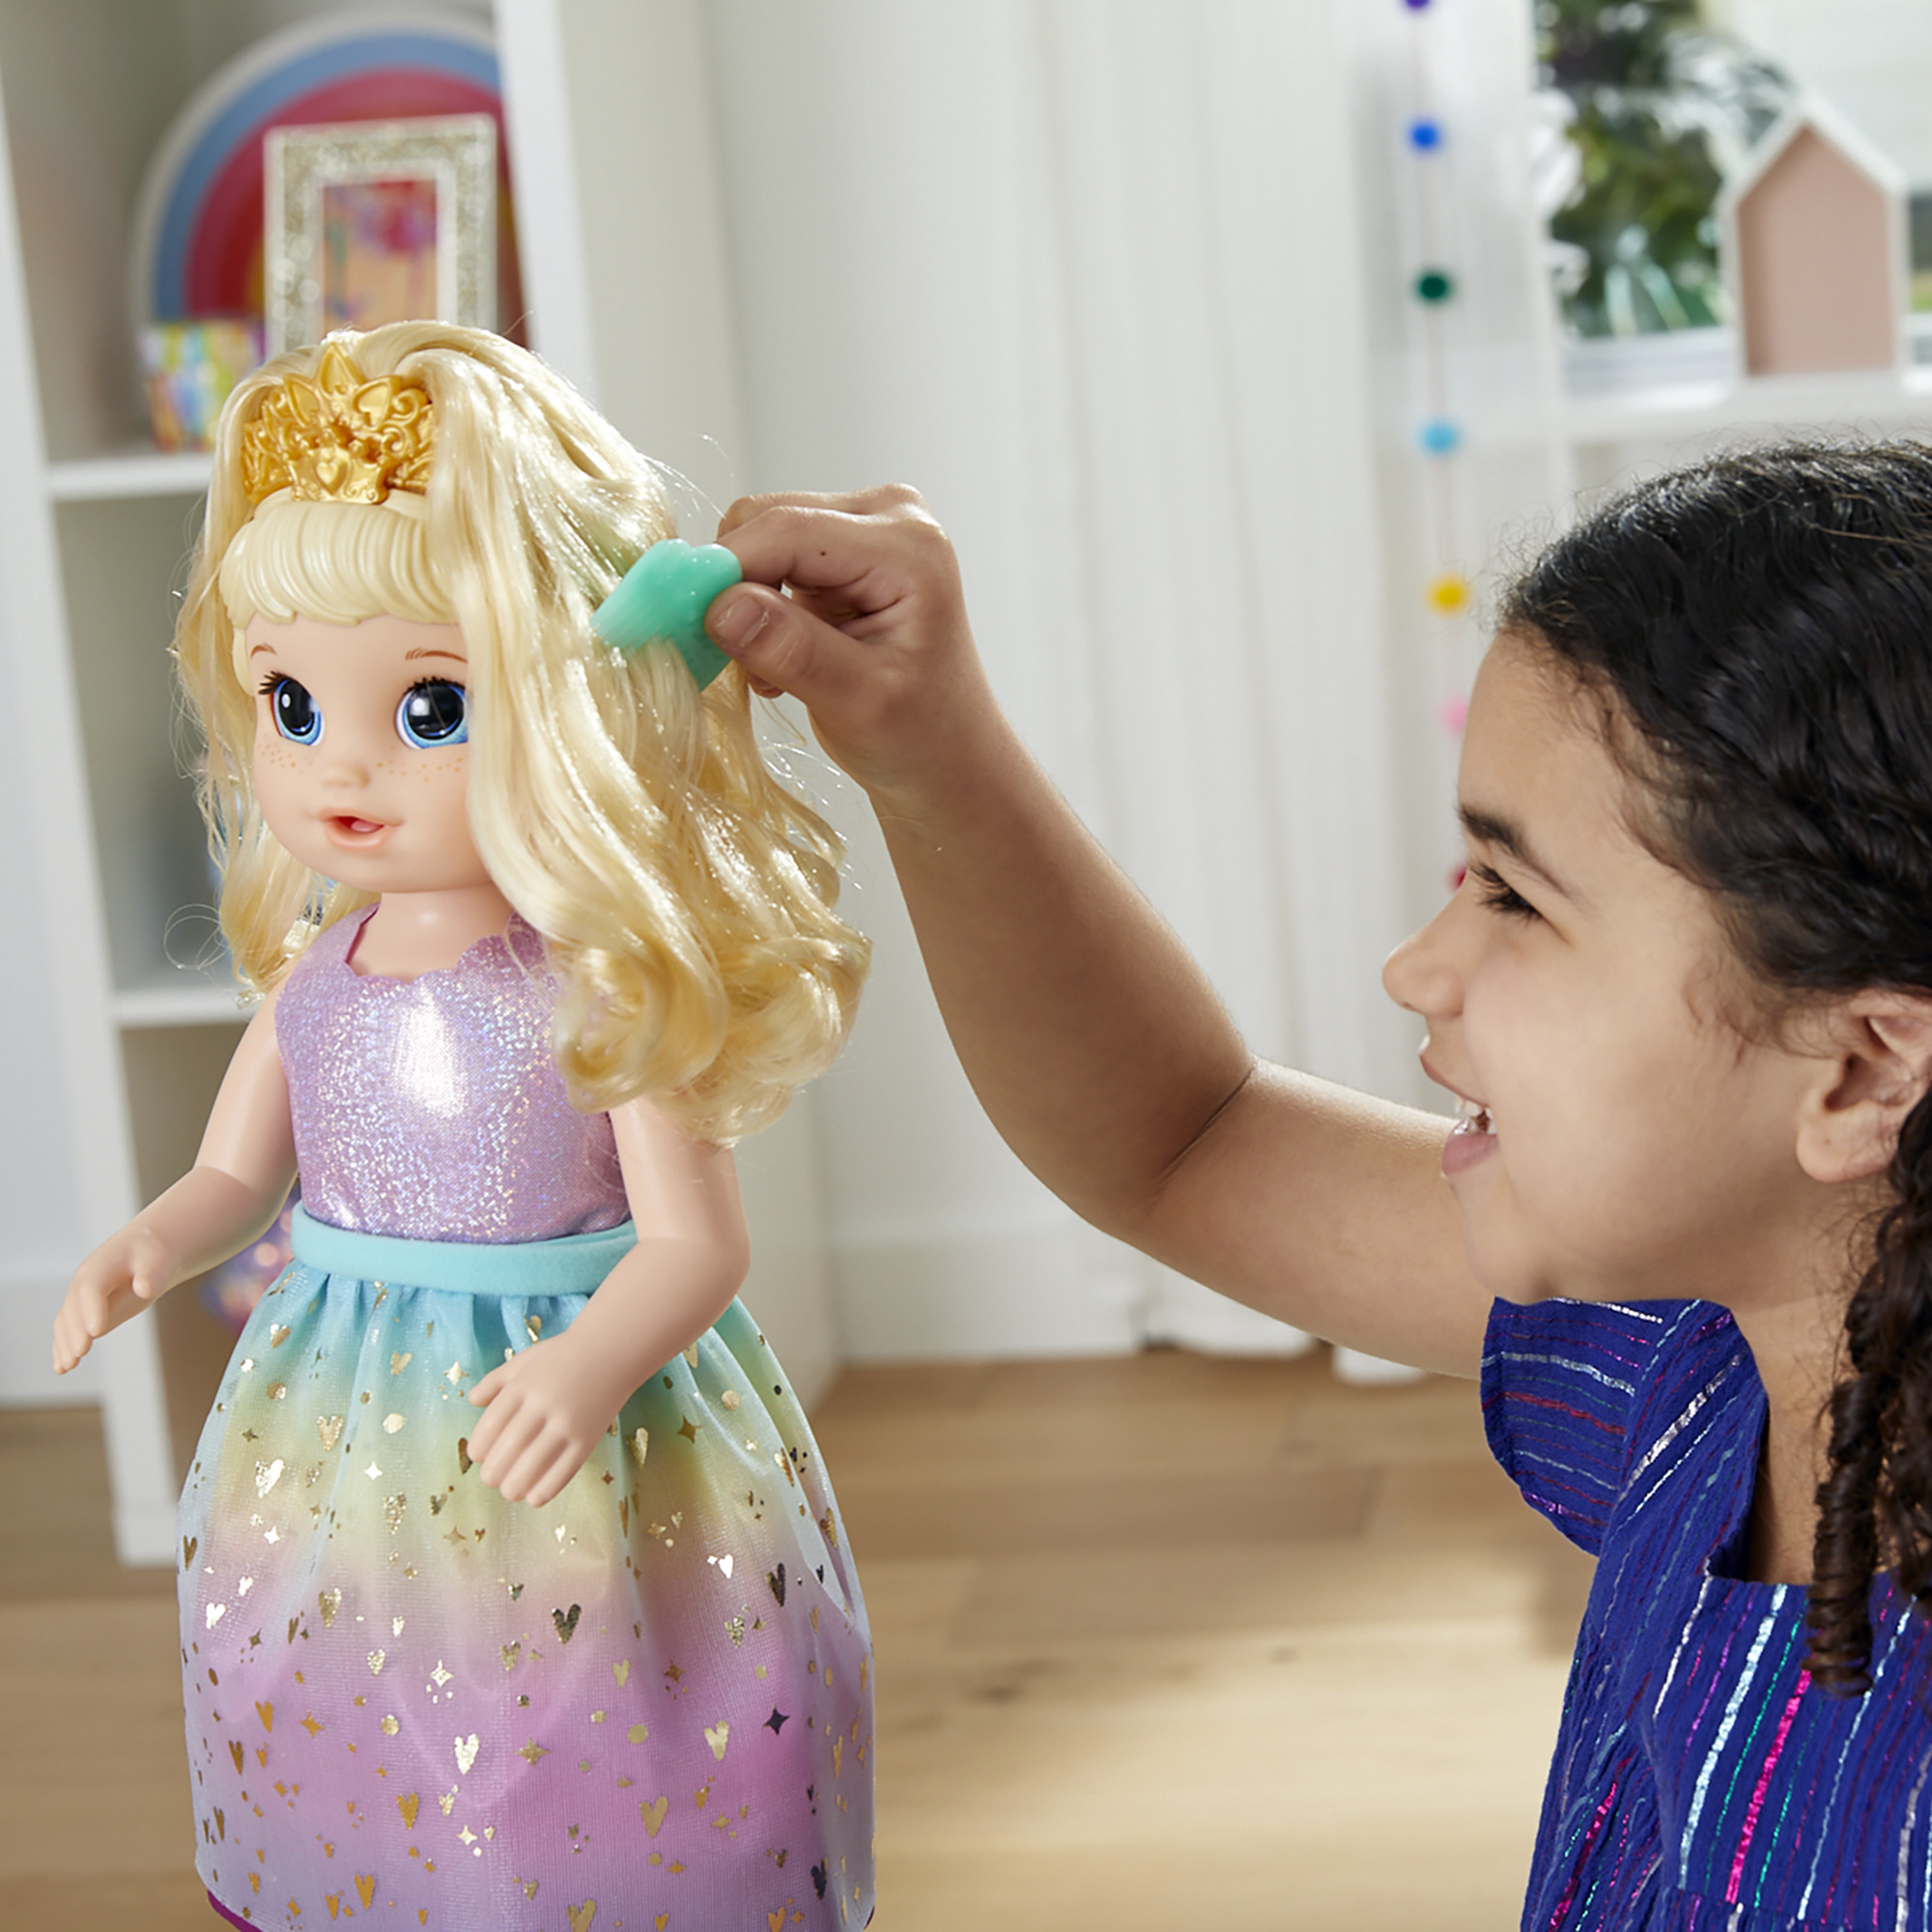 Baby Alive: Princess Ellie Grows Up! 15-Inch Doll Blonde Hair, Blue Eyes Kids Toy for Boys and Girls - image 4 of 12